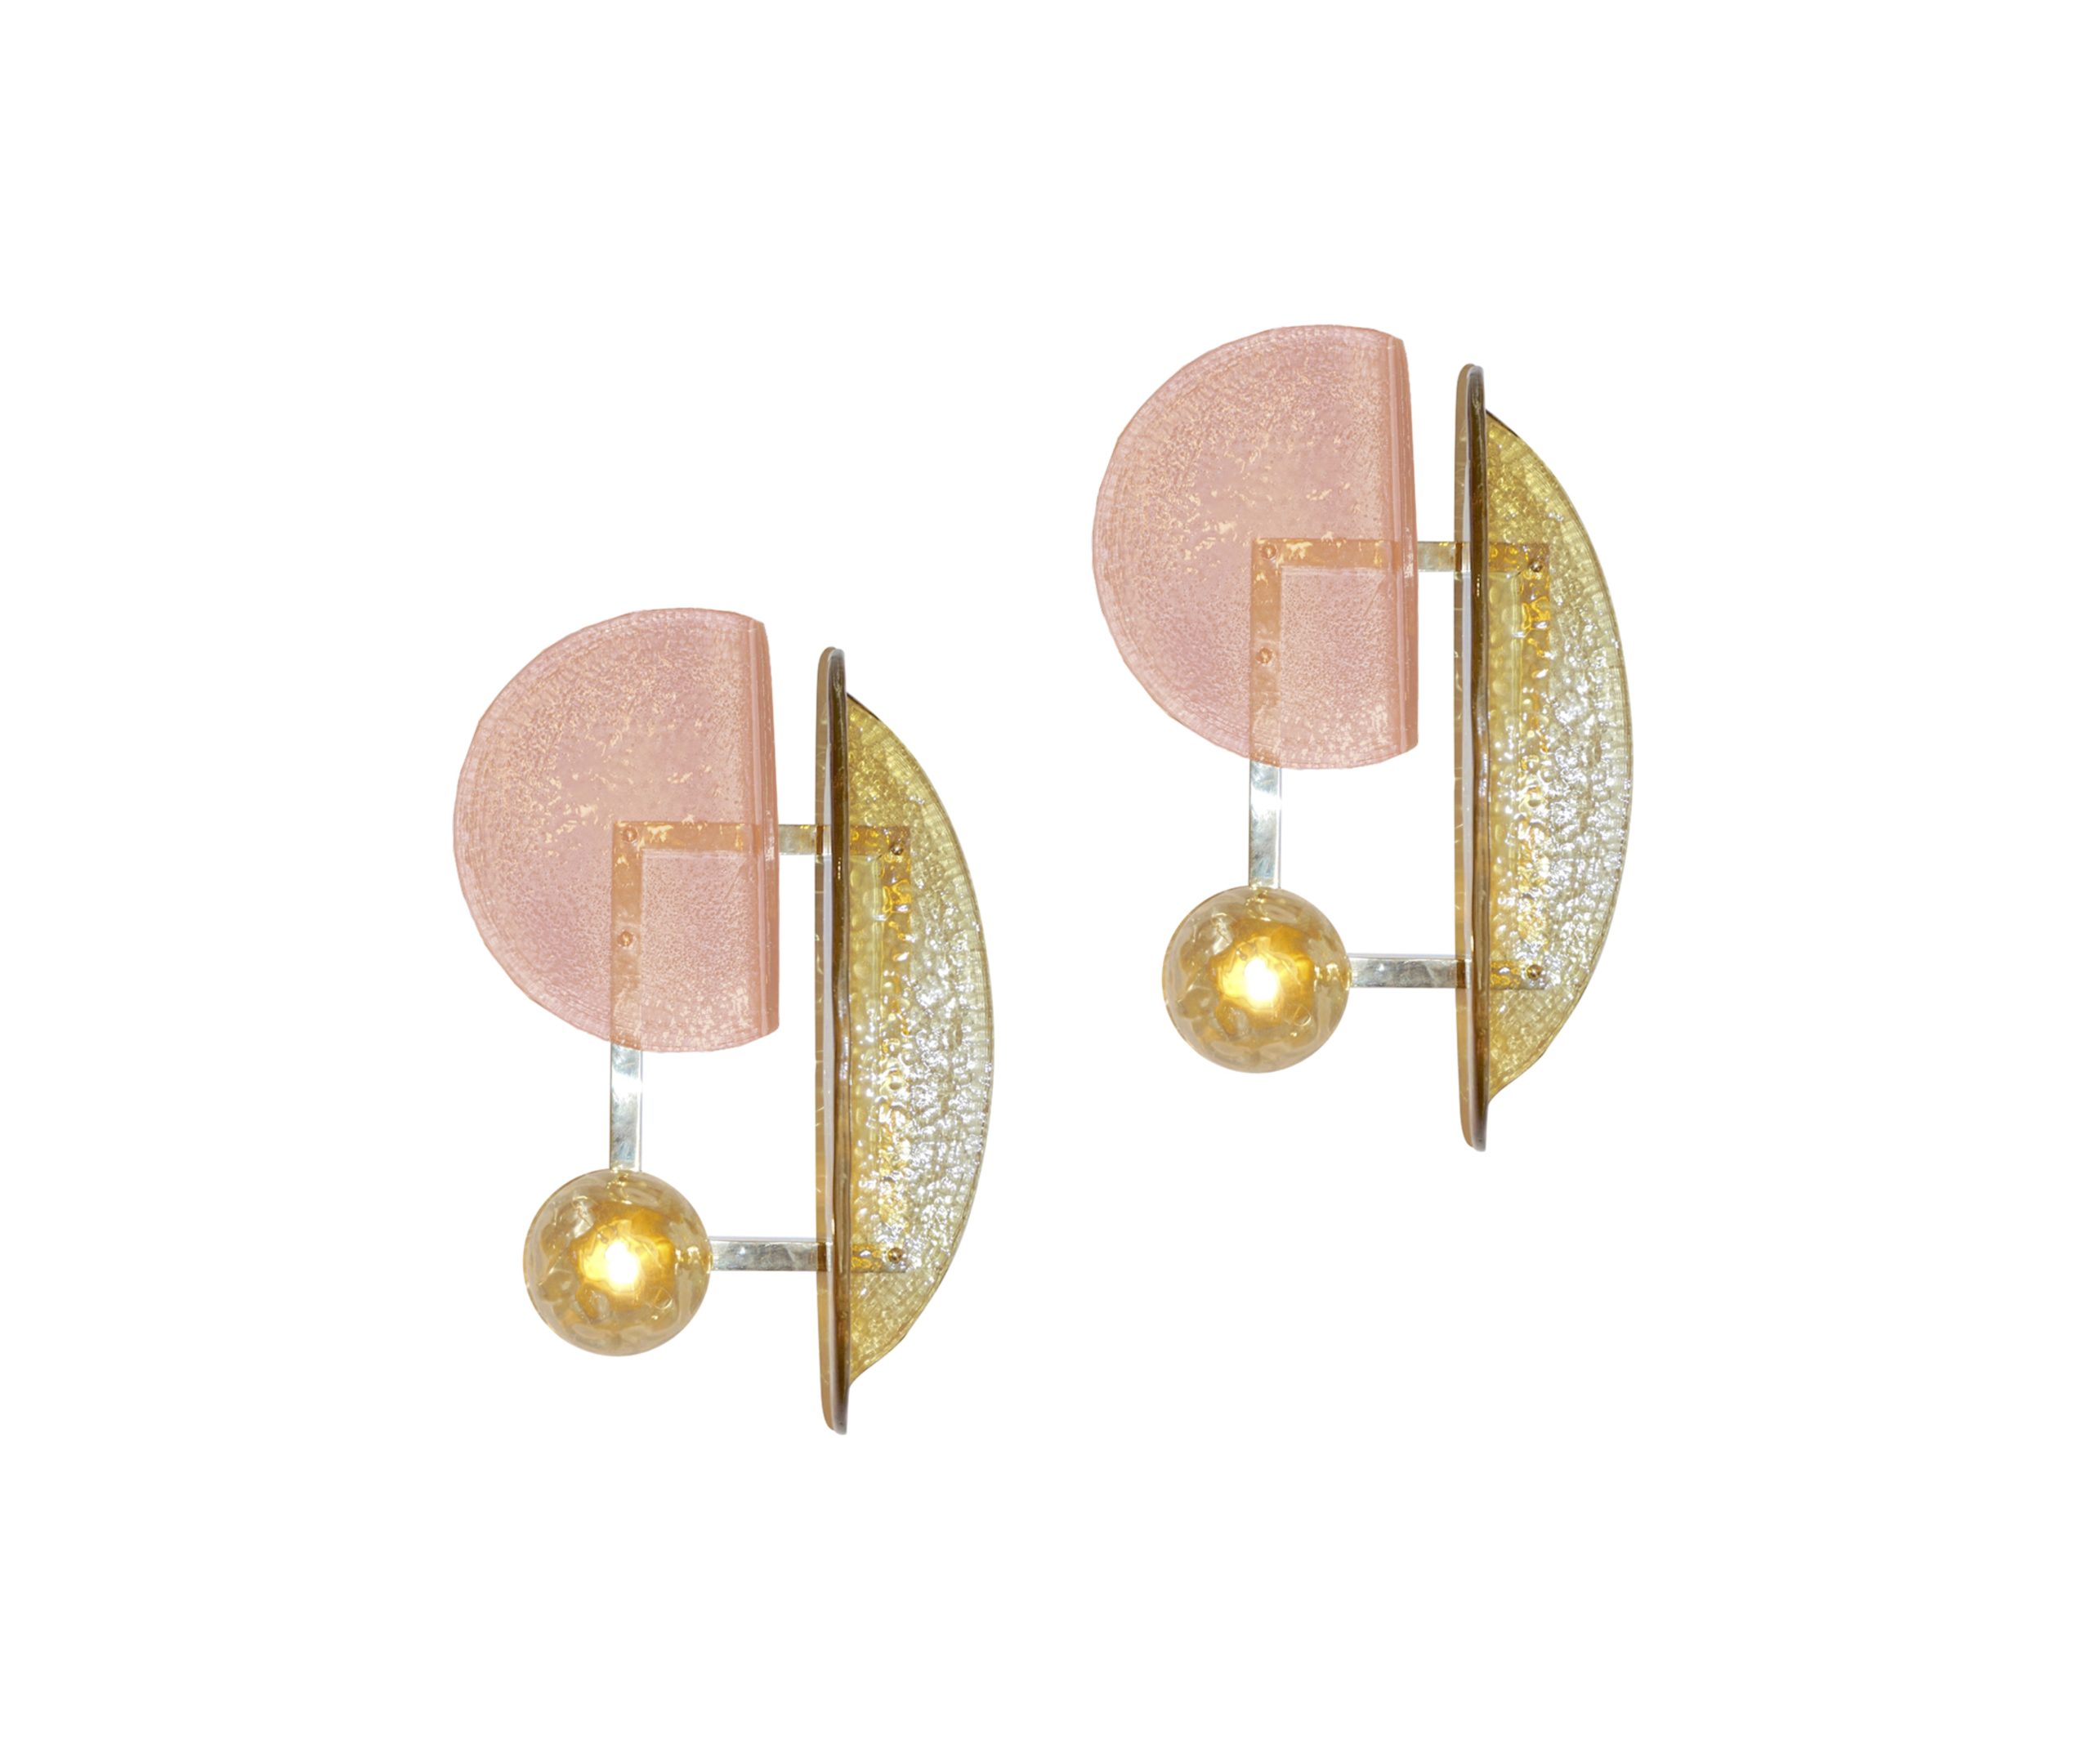 cosulich_interiors_and_antiques_products_new_york_design_contemporary_italian_pair_pink_amber_murano_glass_gold_brass_sconces-scaled-1